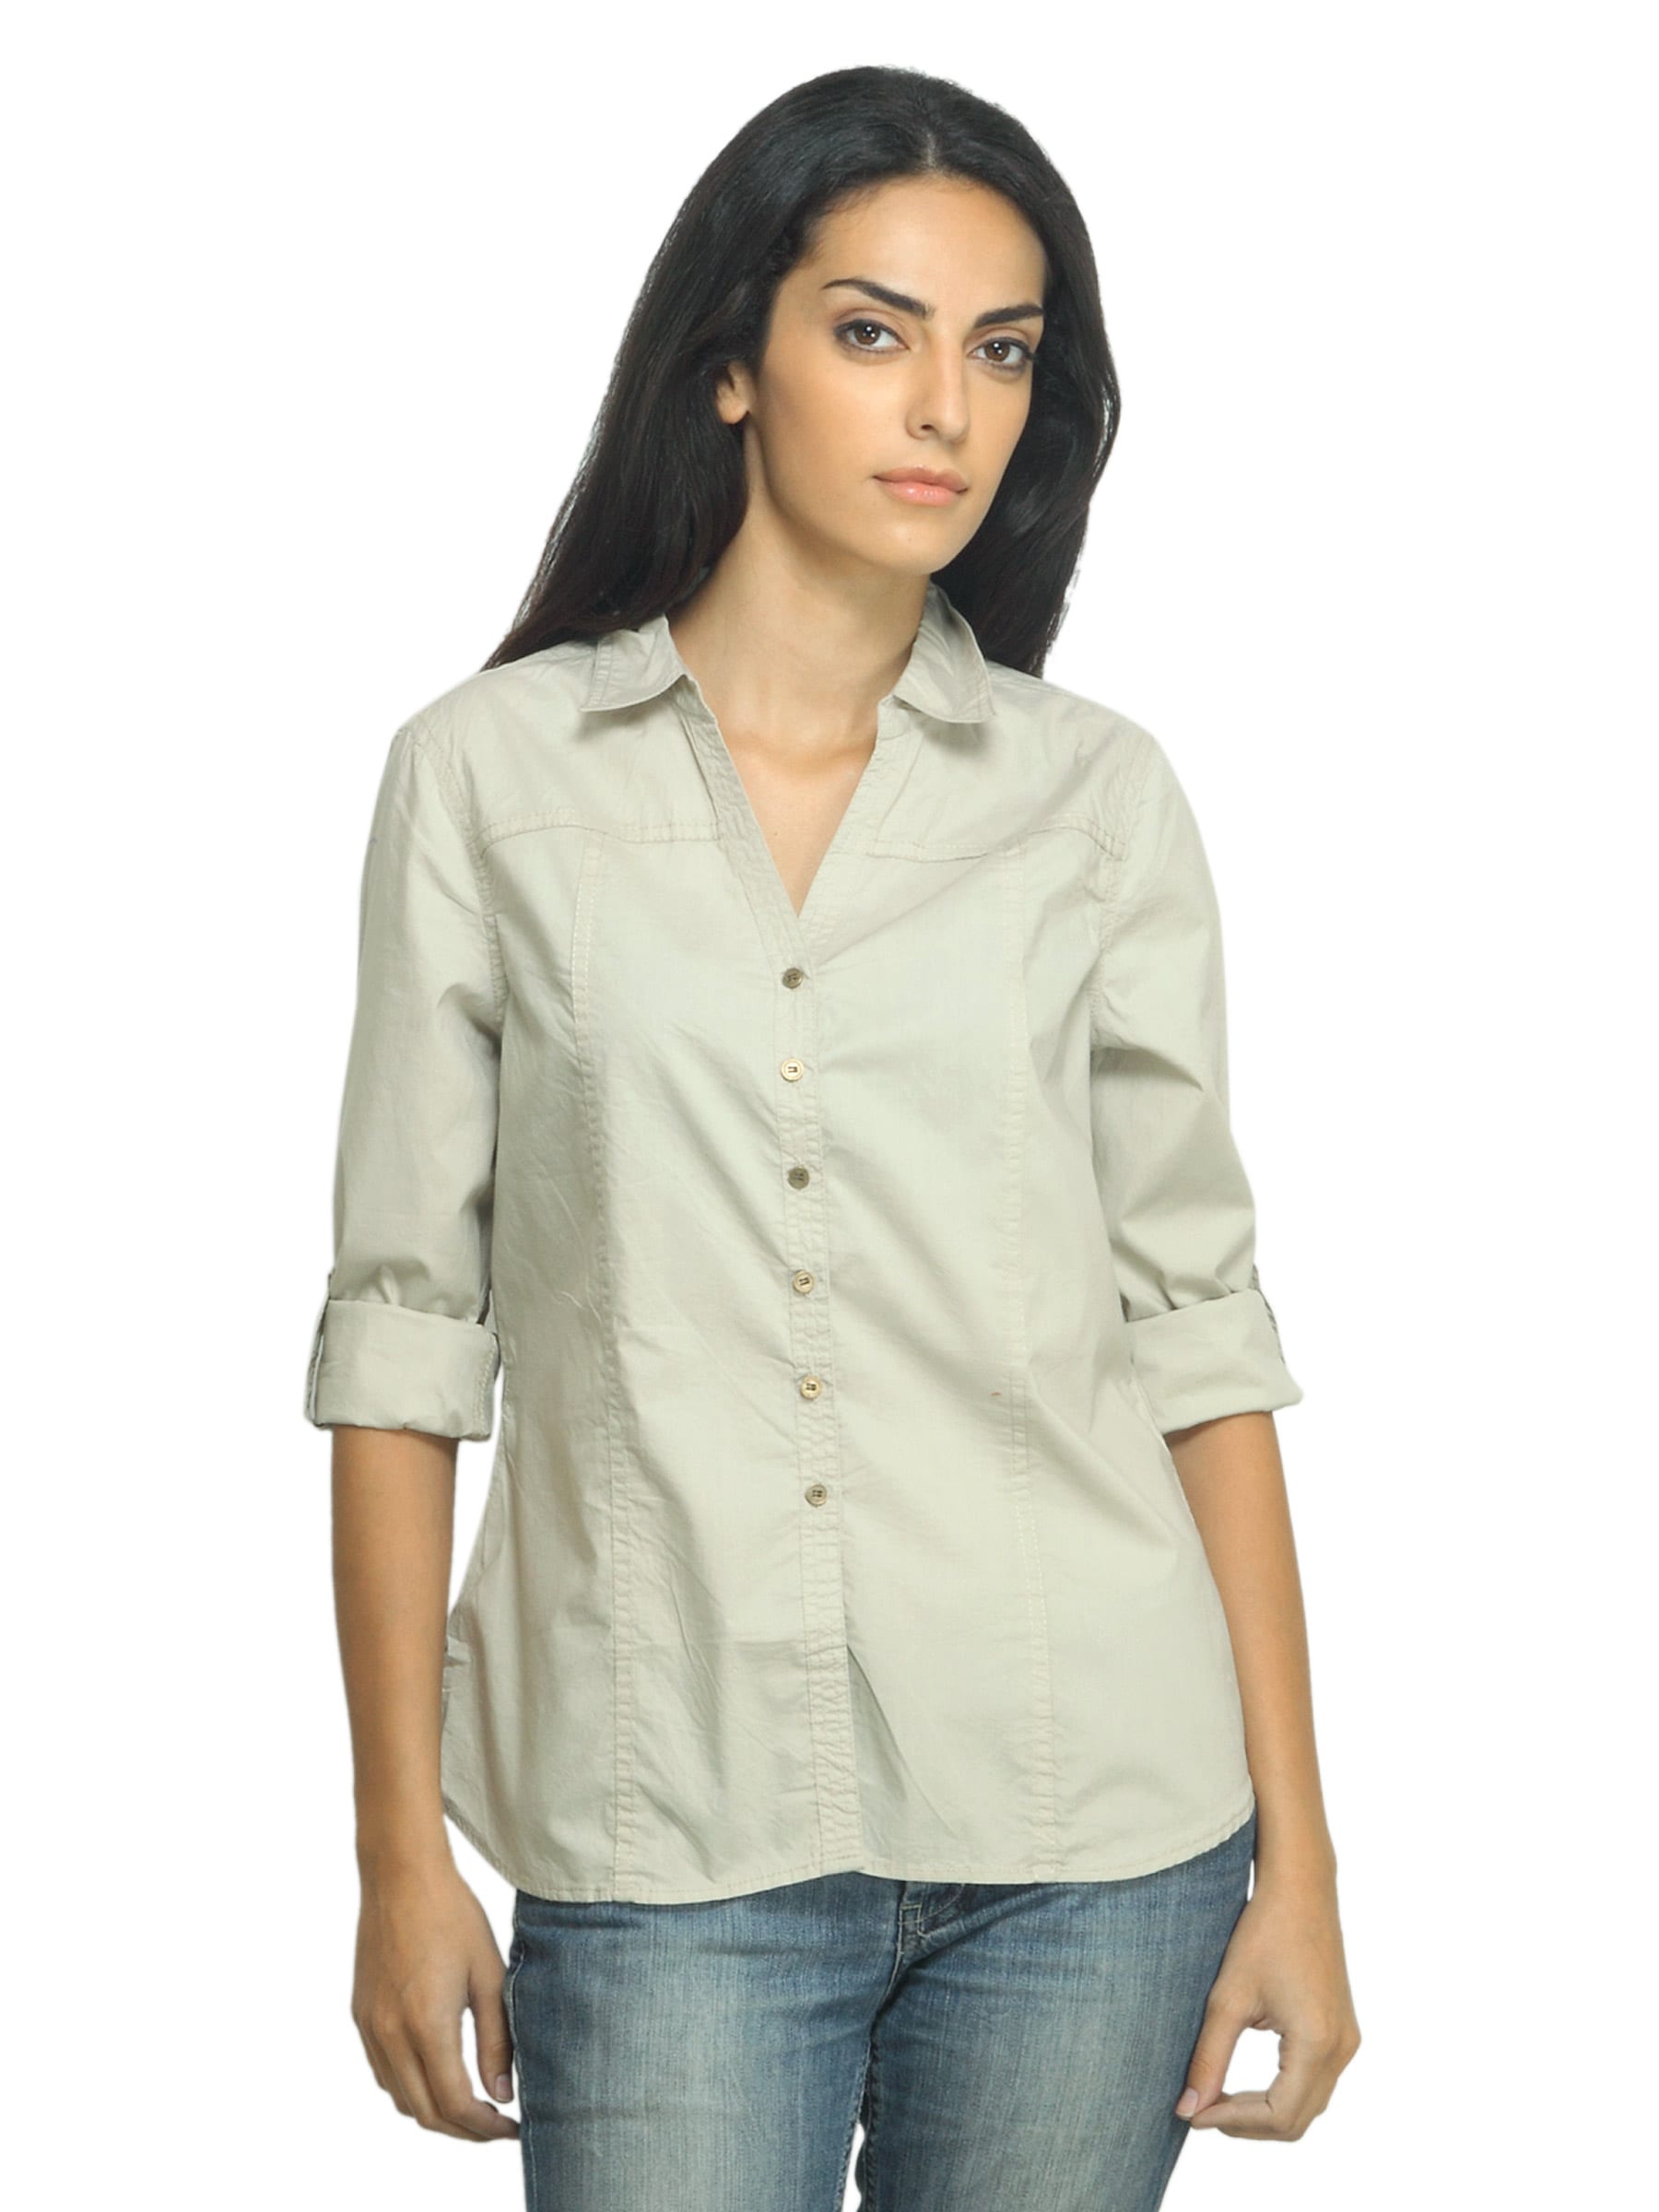 Scullers For Her Beige Shirt